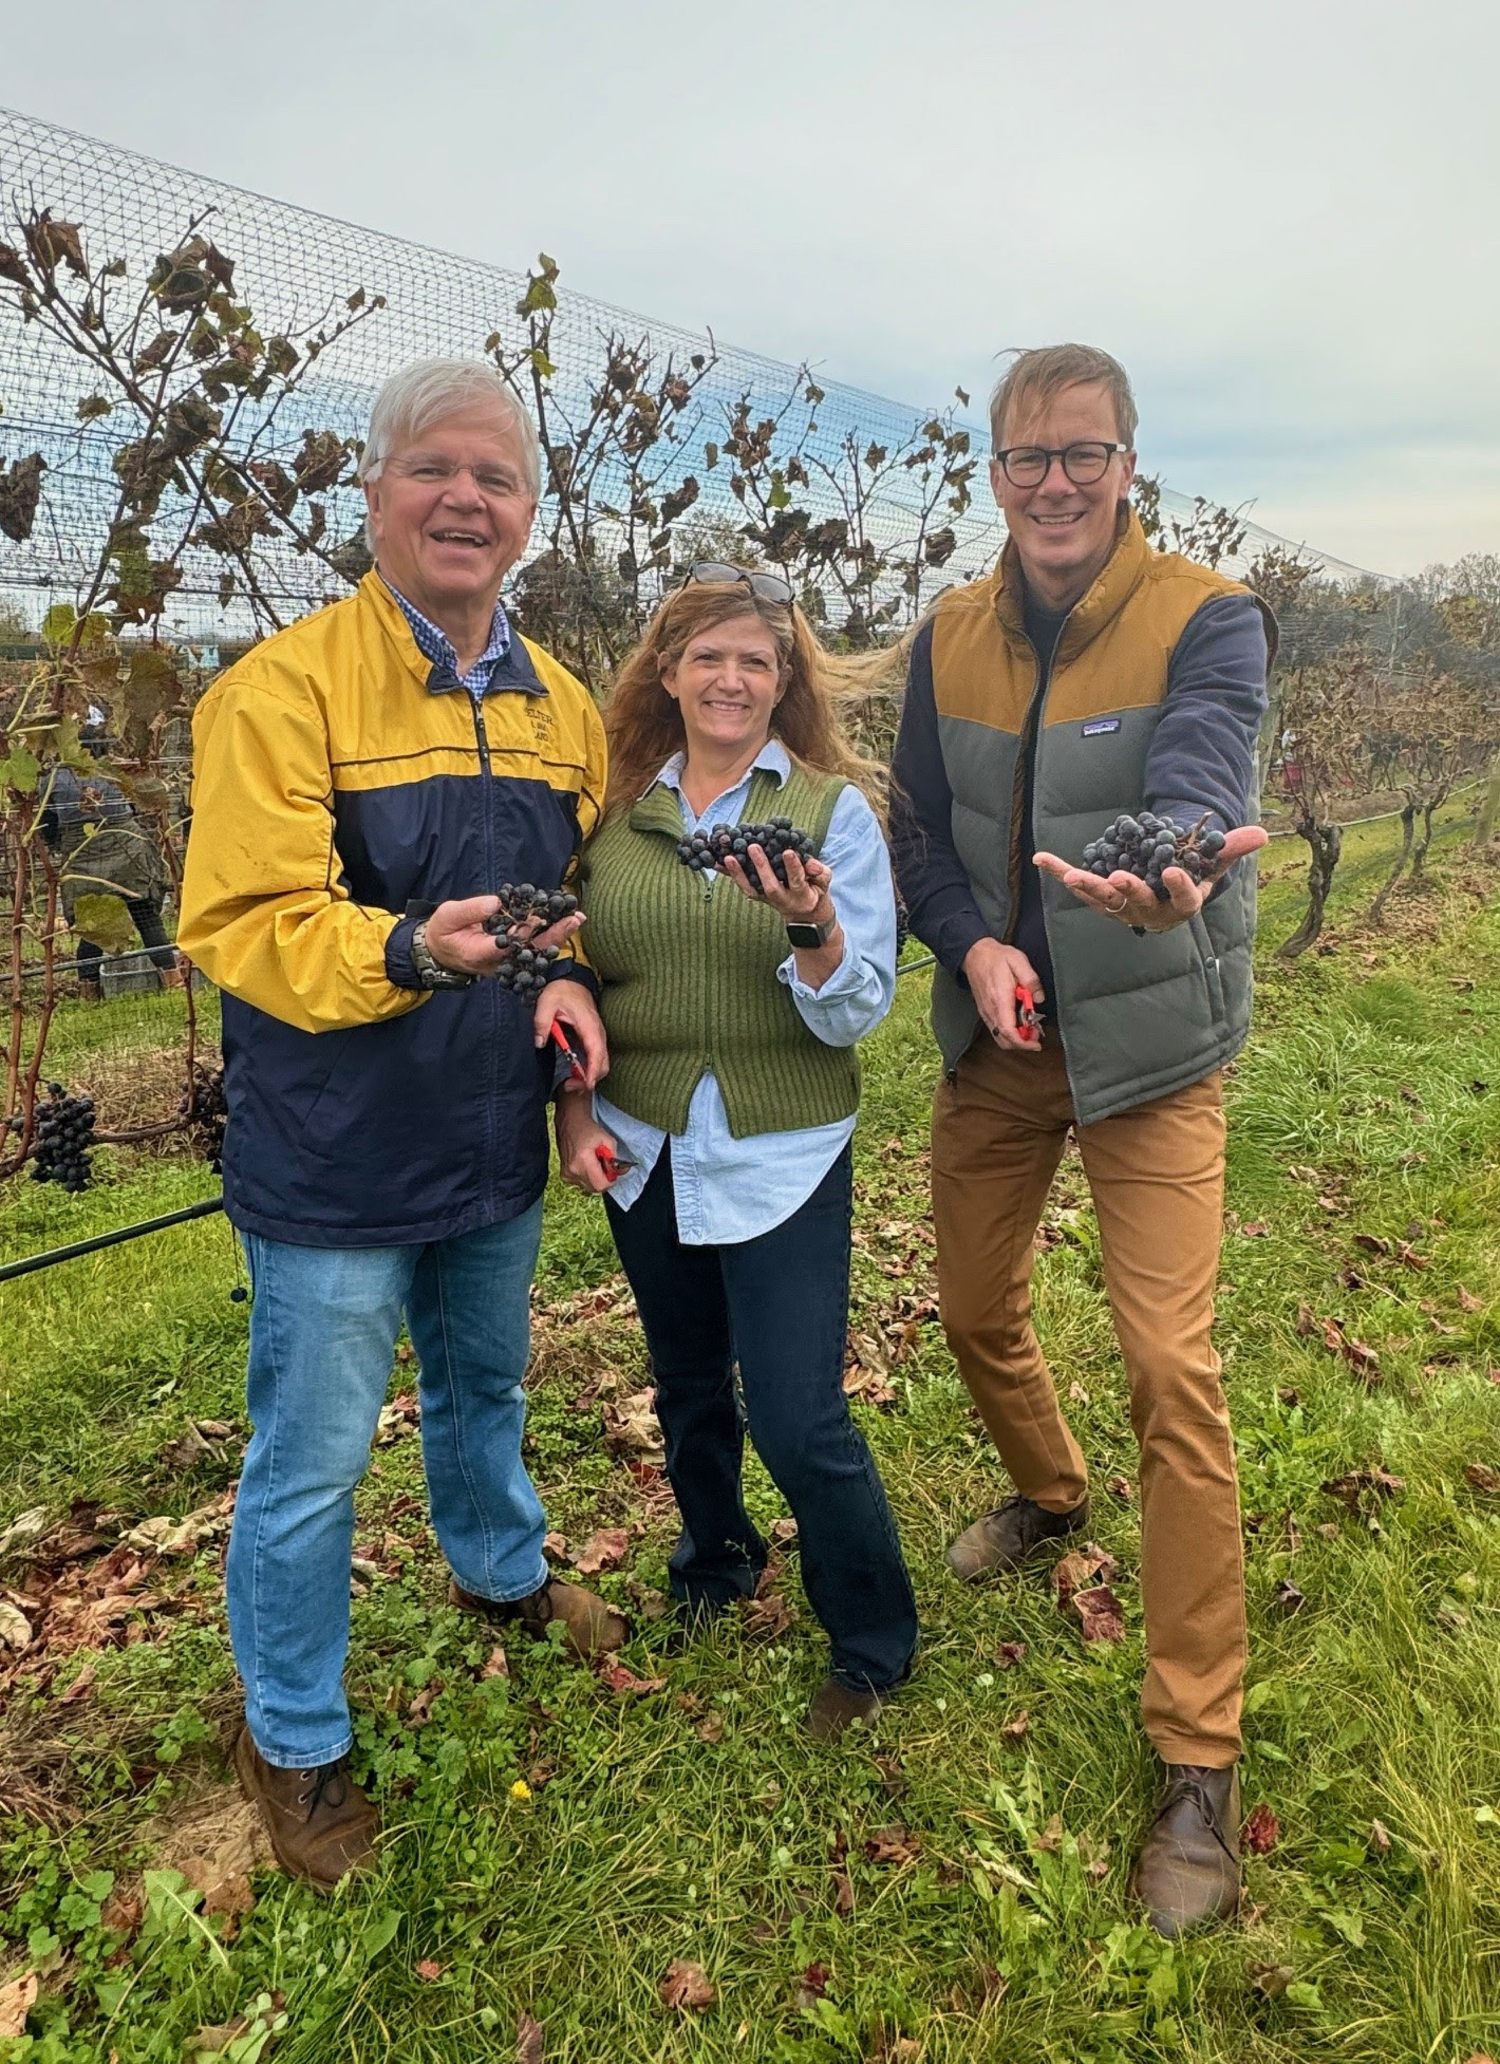 Last week, Assemblyman Fred W. Thiele Jr. and his wife, NancyLynn Thiele, were invited by Wölffer Estates CEO Max Rohn to spend time picking the top-end Merlot grapes during 2023 harvest at Wölffer Estates Vineyard. COURTESY OFFICE OF ASSEMBLYMAN FRED THIELE